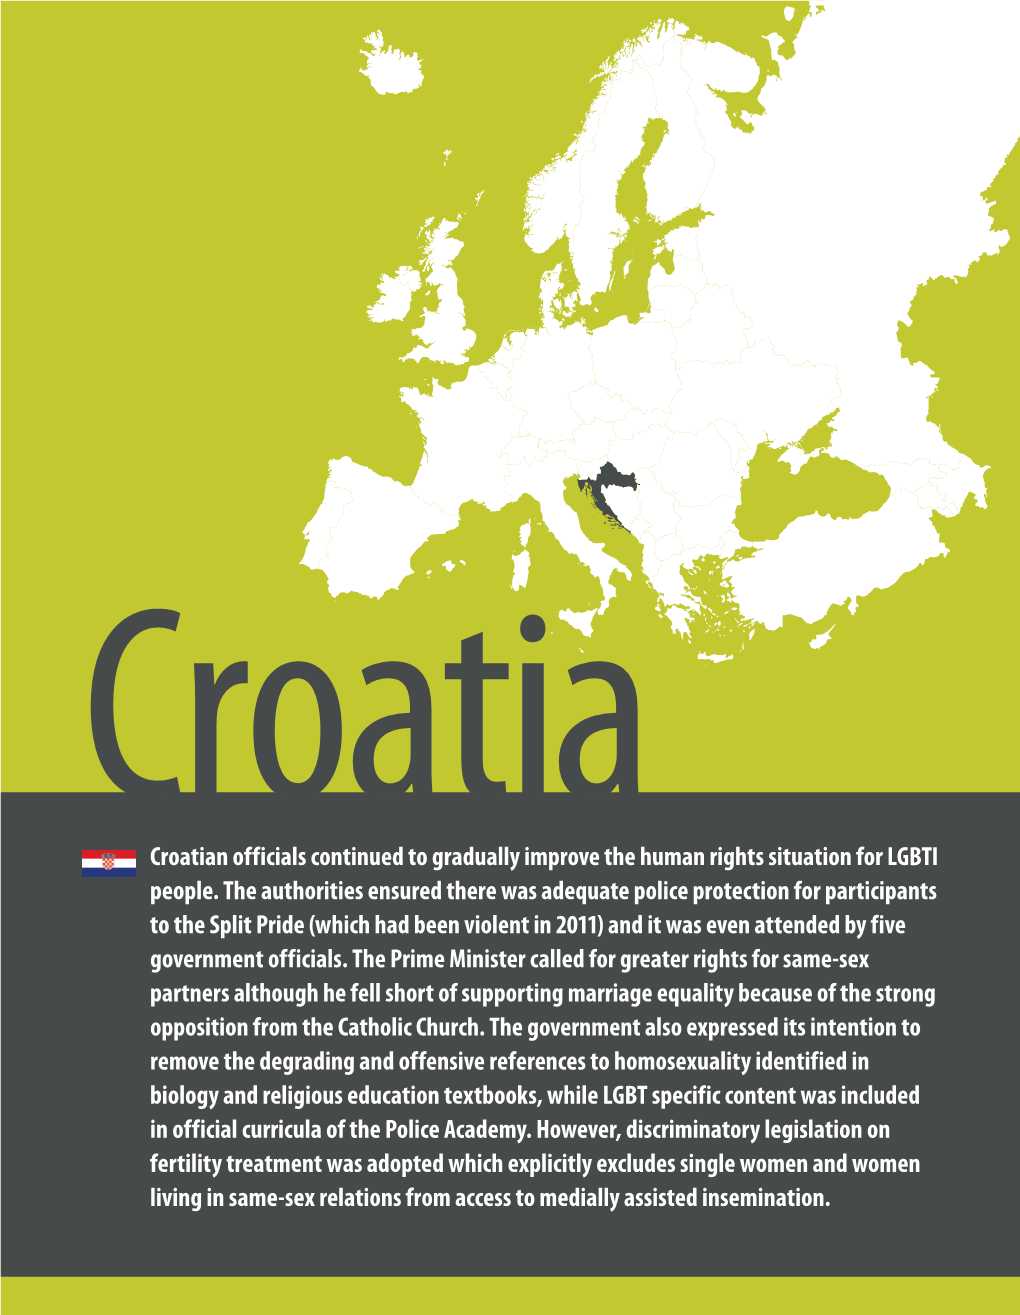 Croatian Officials Continued to Gradually Improve the Human Rights Situation for LGBTI People